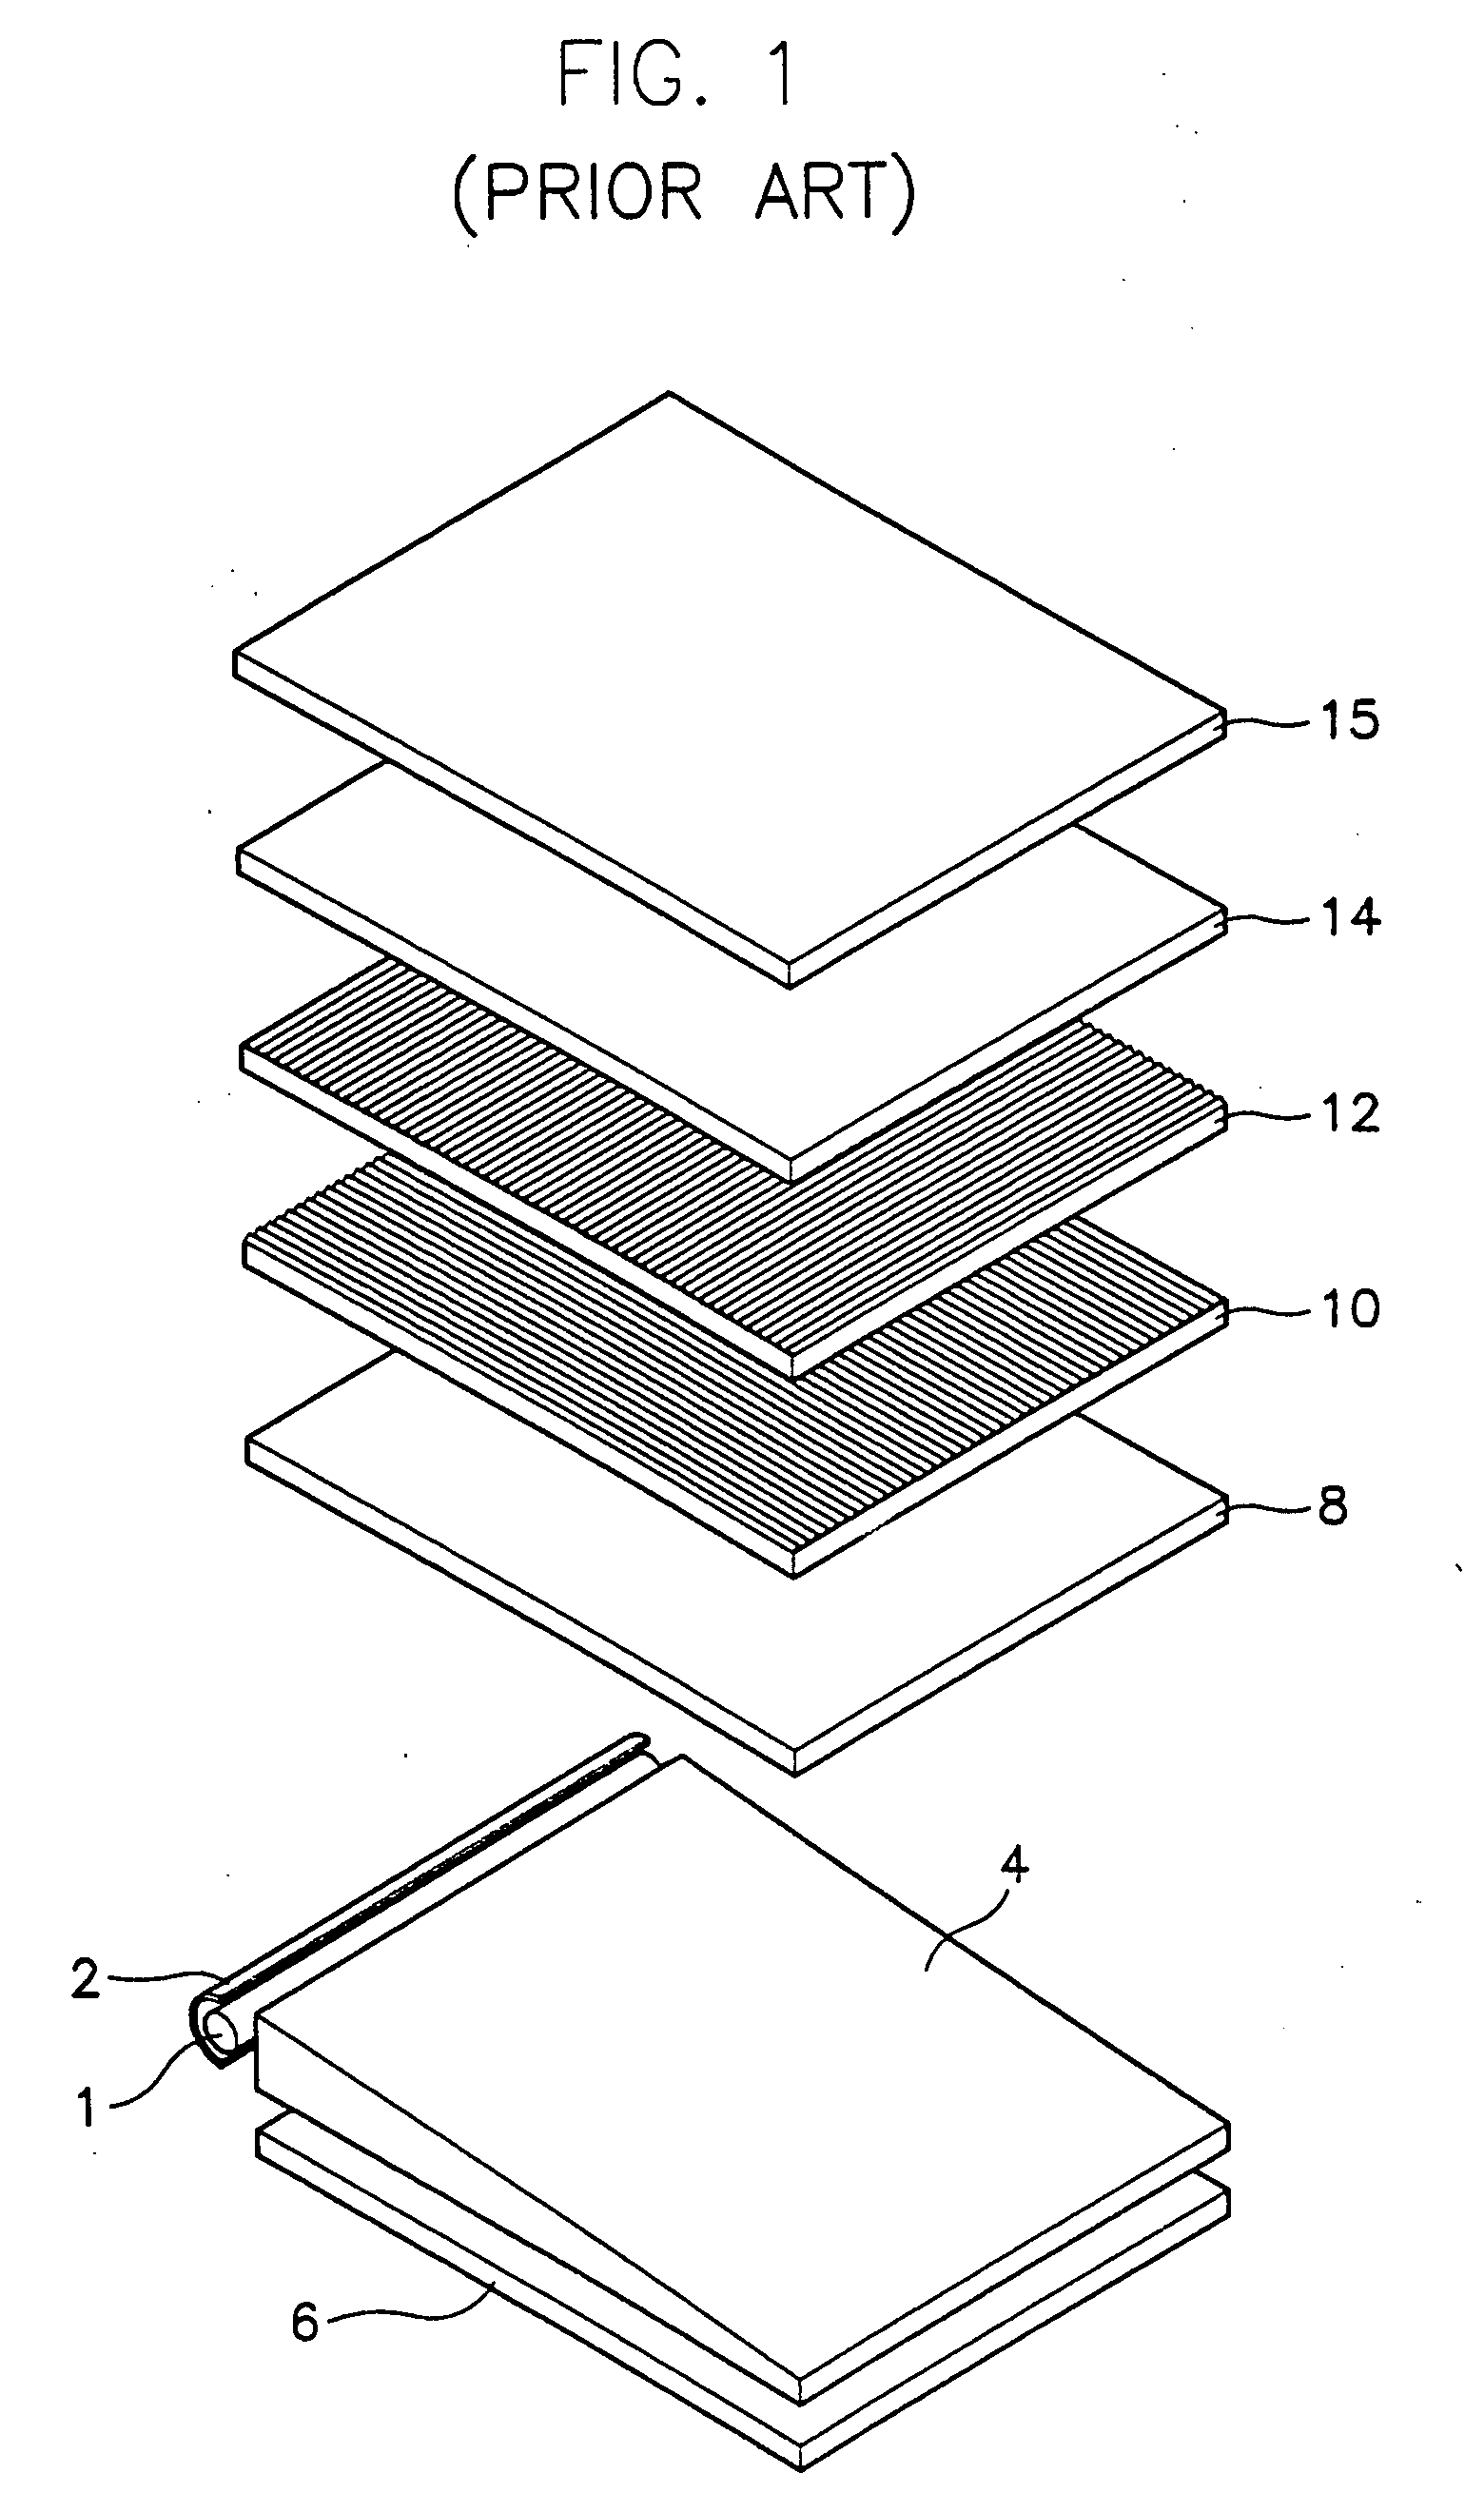 Method for illuminating liquid crystal display device, a back-light assembly for performing the same, and a liquid crystal display device using the same